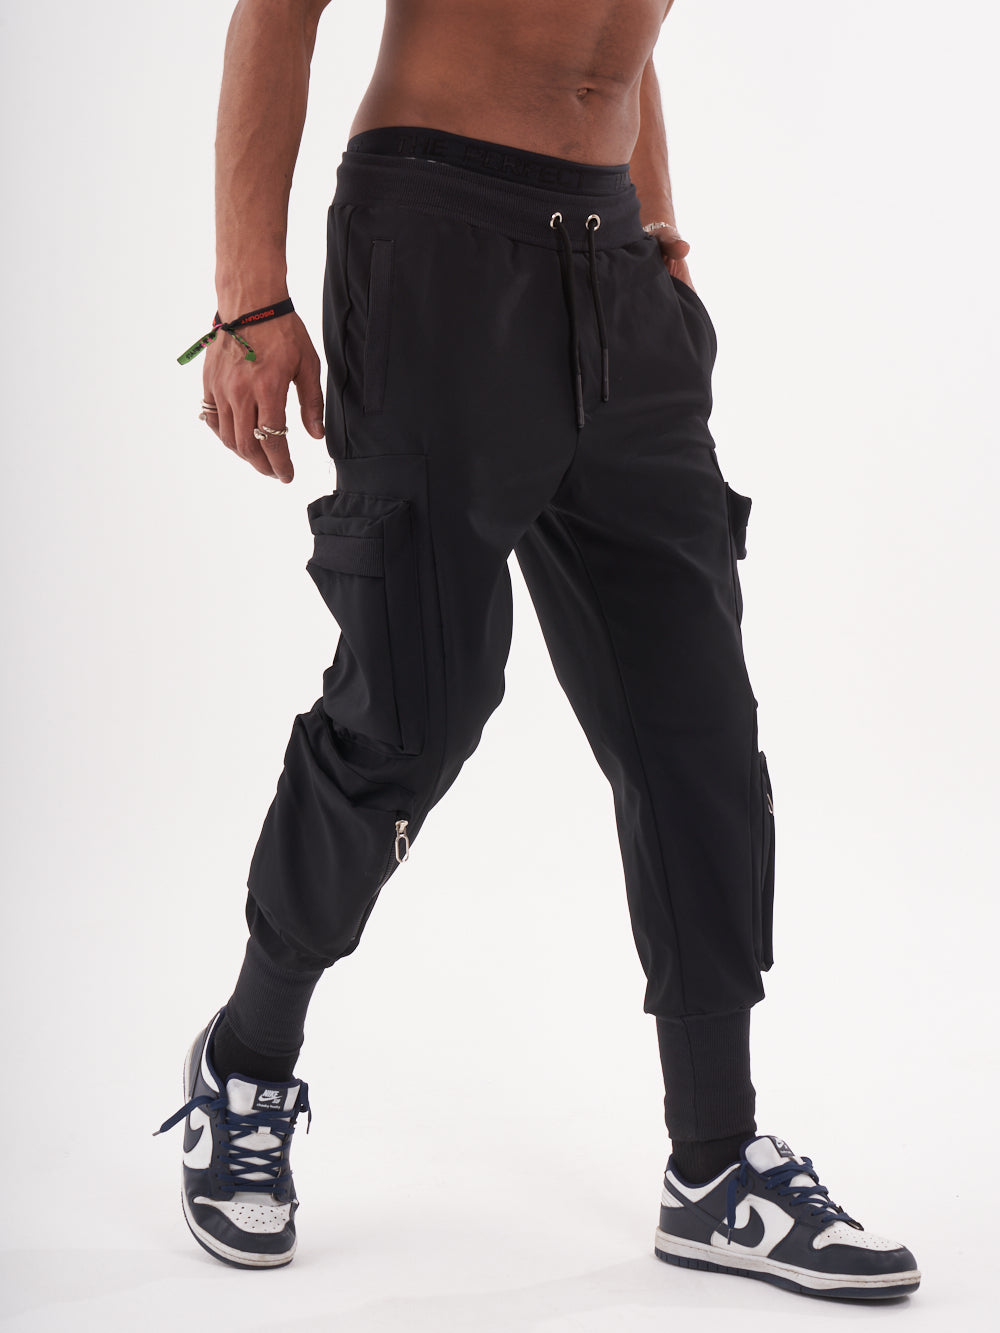 A man in OUTLIER JOGGERS | BLACK is standing on a white background.